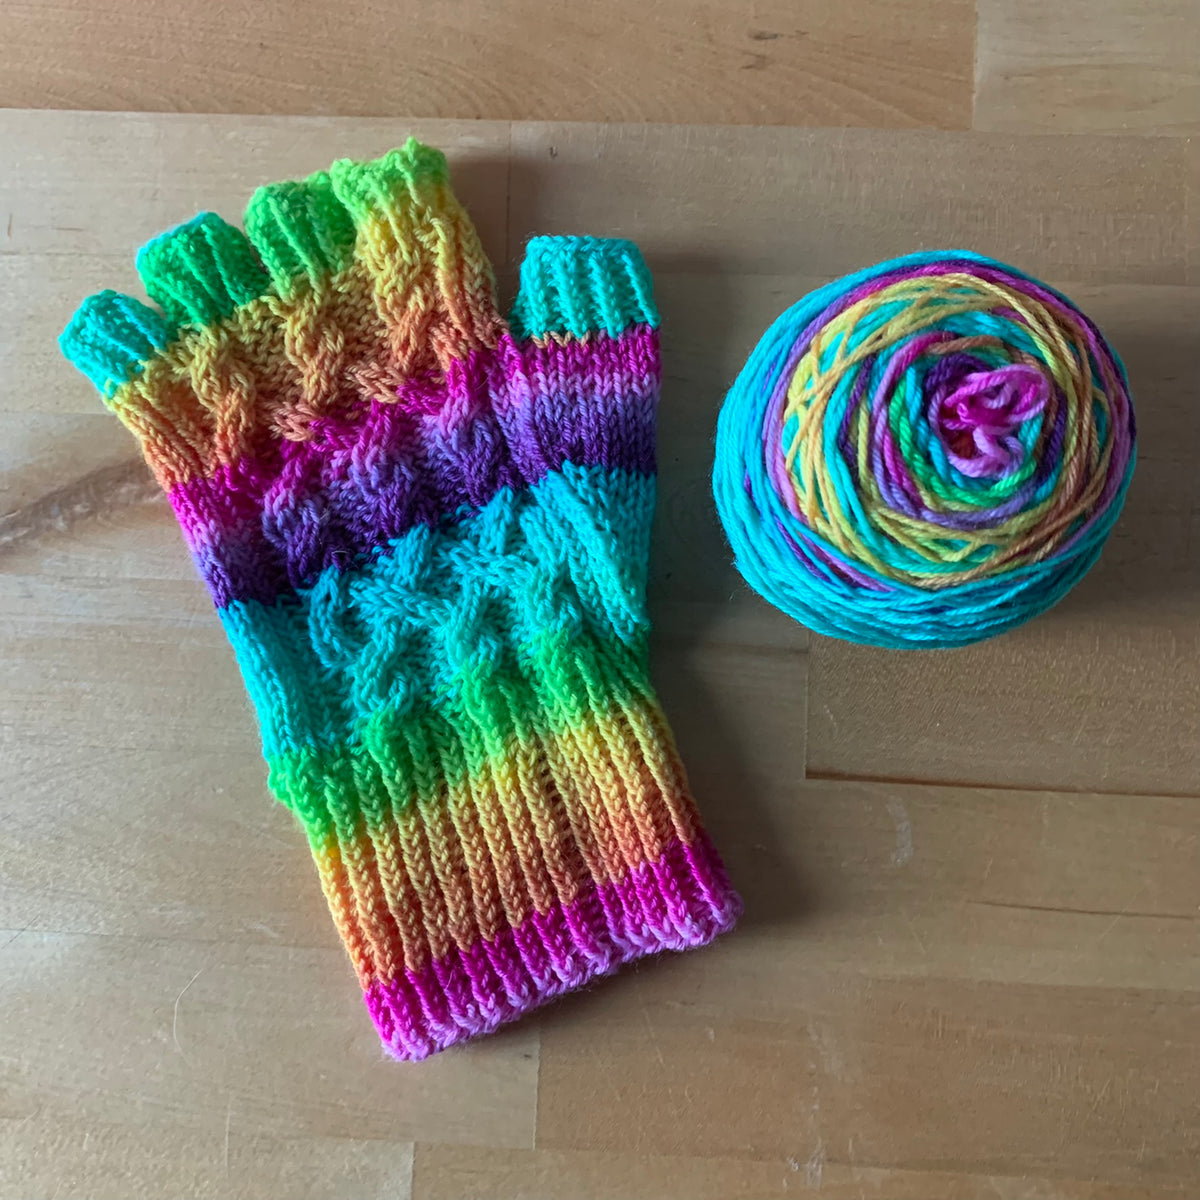 What to knit with self-striping yarn that's not socks – rustyferret